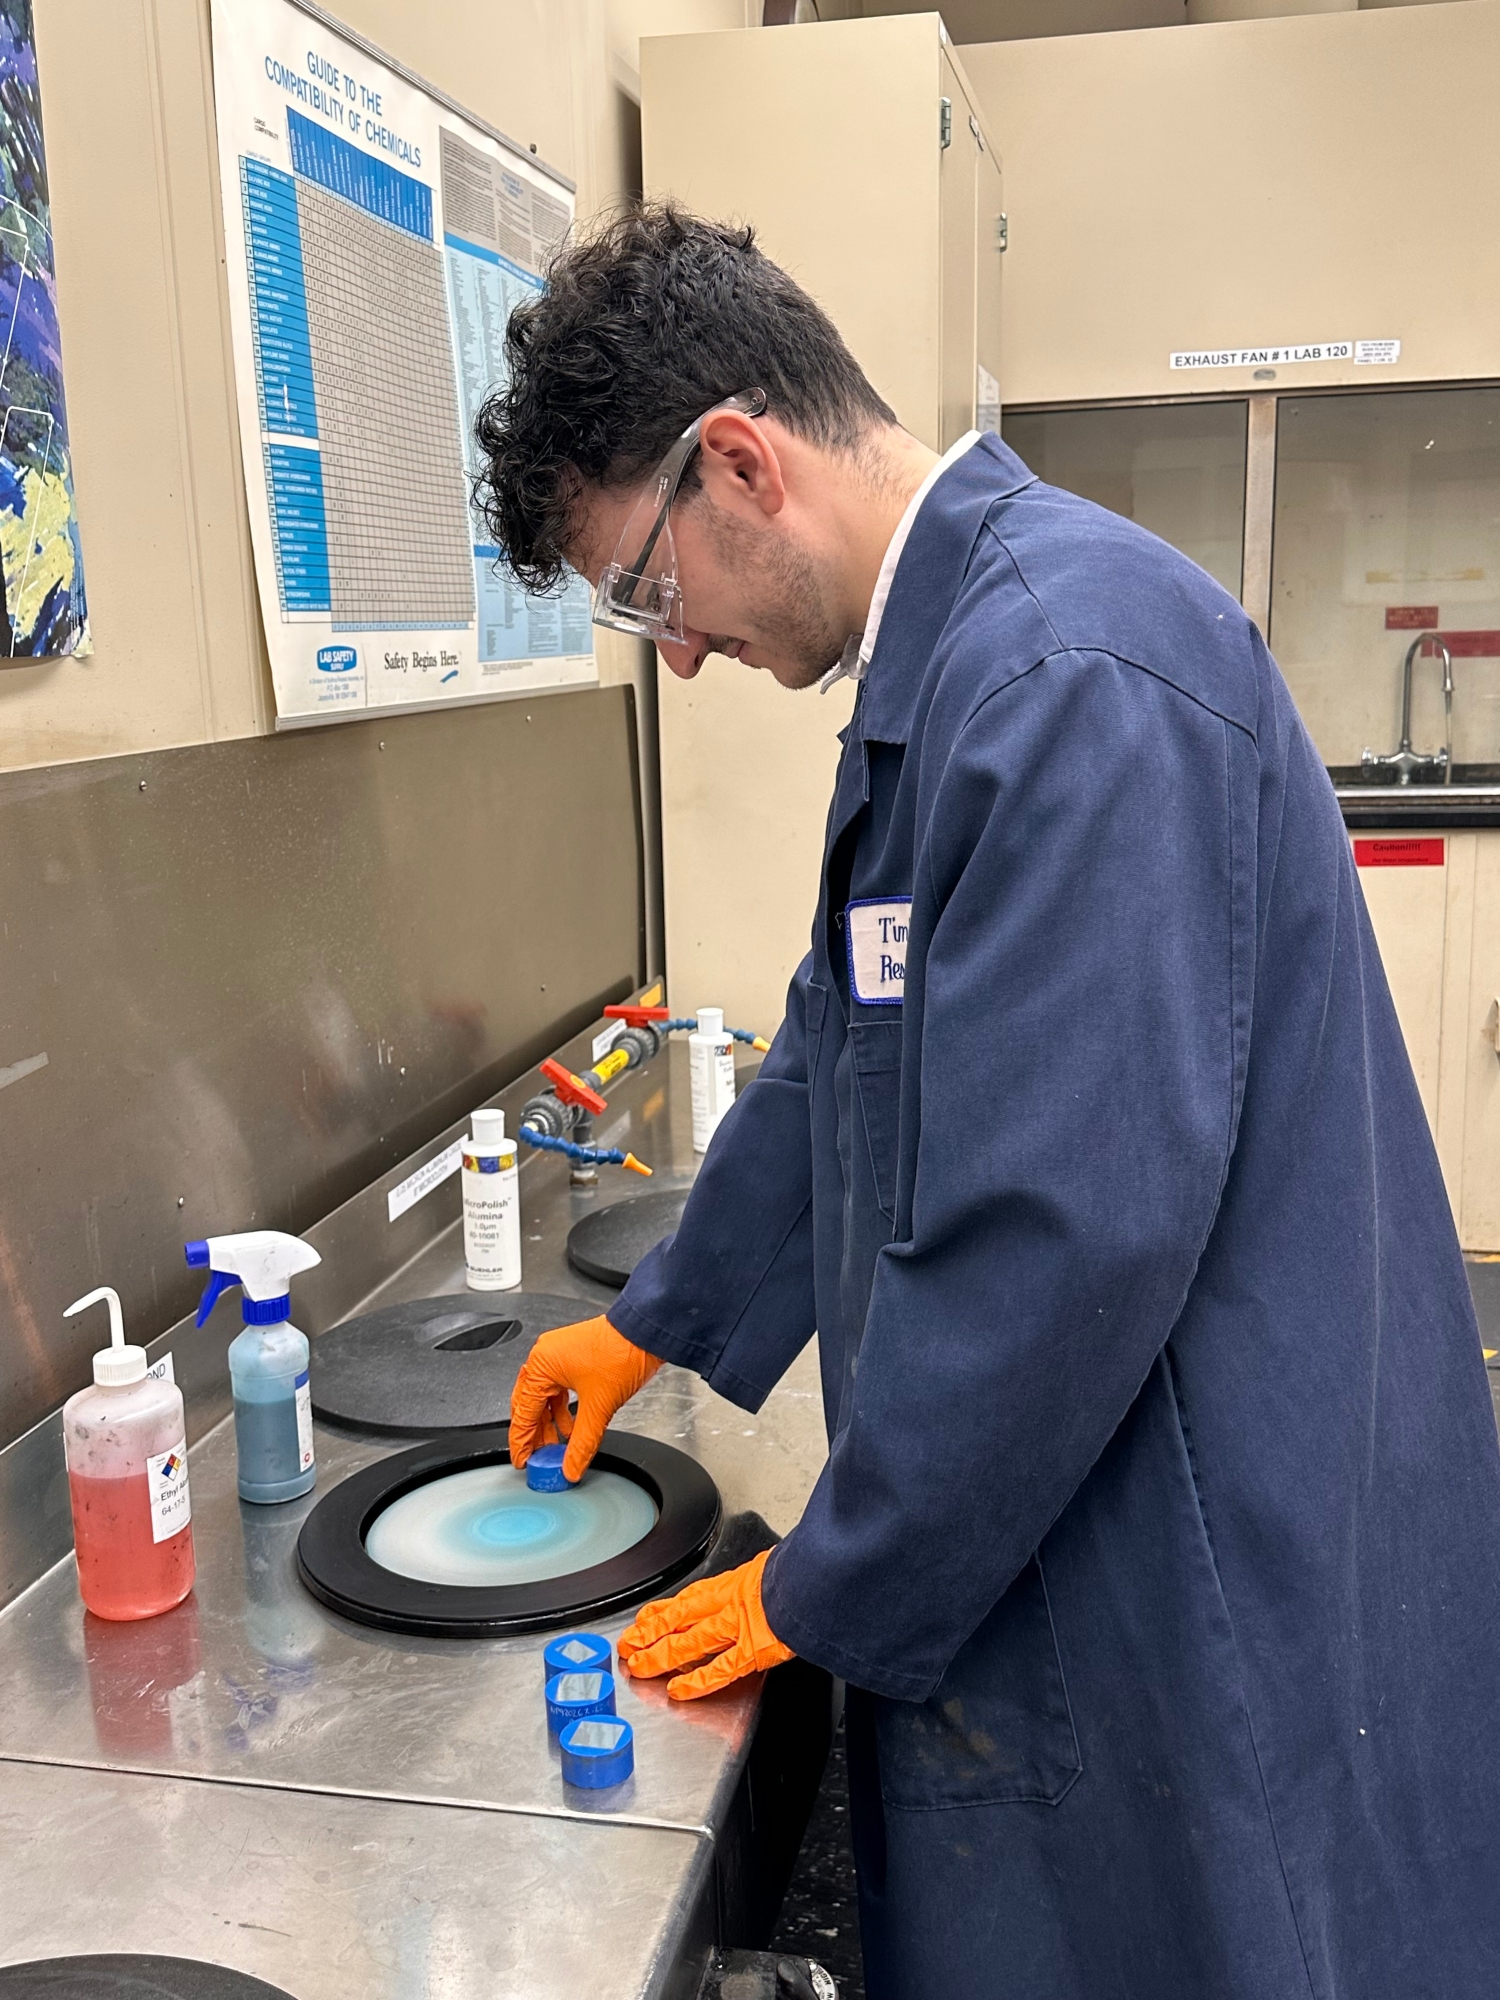 Andrew Zilavy in a lab using equipment